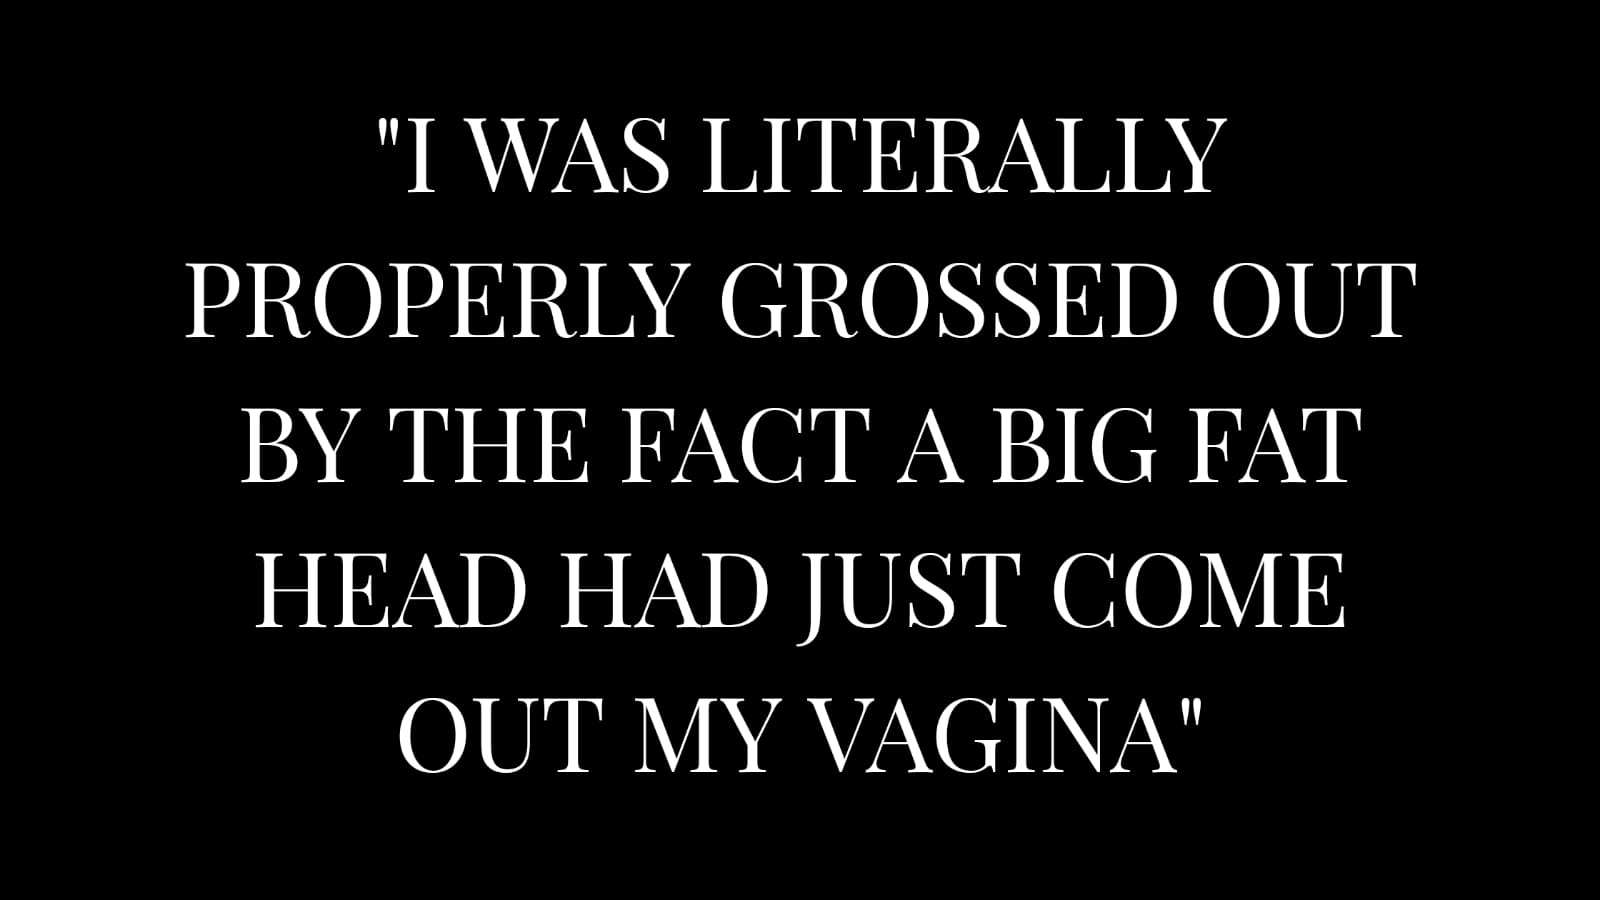 I was literally properly grossed out by the fact a big fat head had just come out my vagina